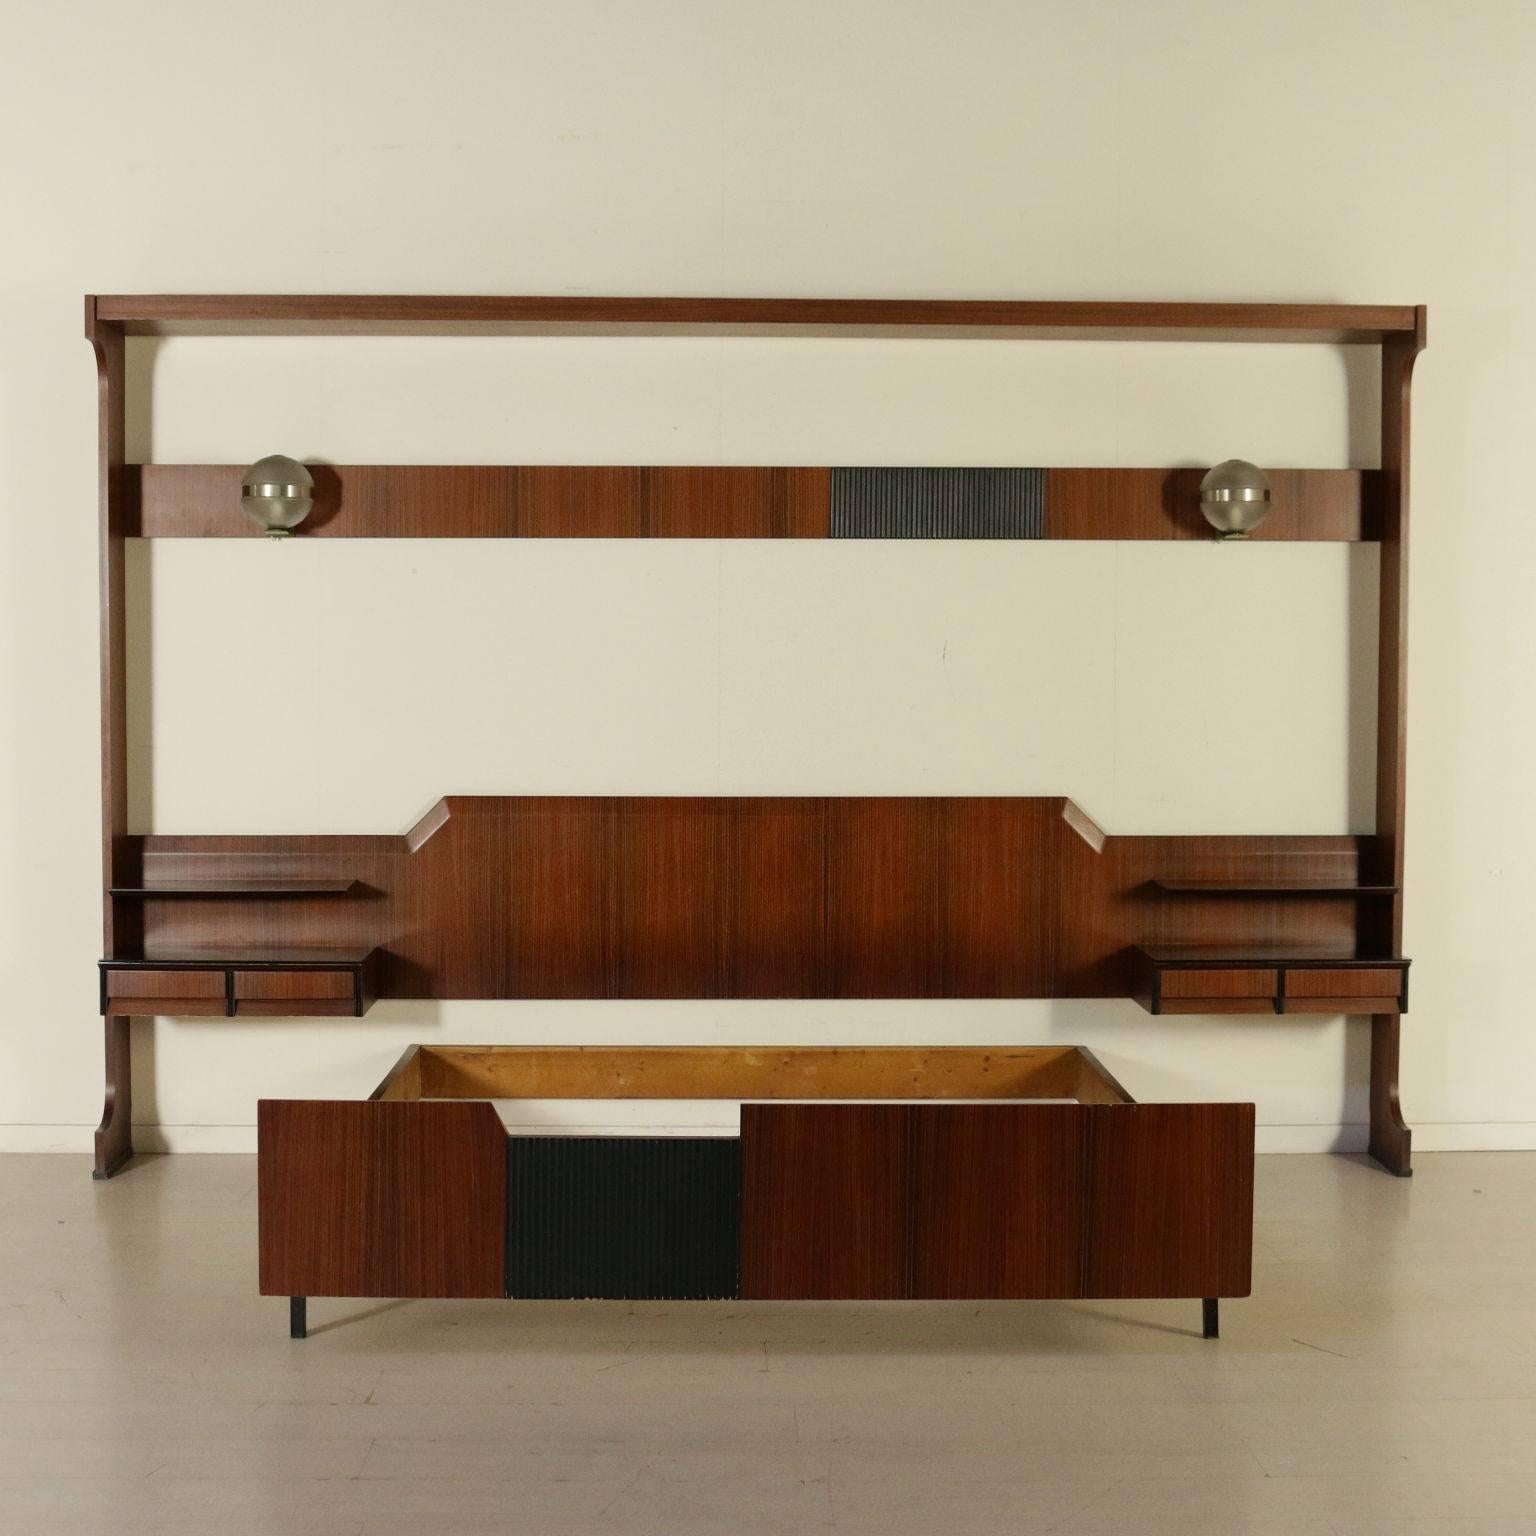 A double bed with hanging bedside tables, rosewood veneer, stained ebony panel. Manufactured in Italy, 1960s.